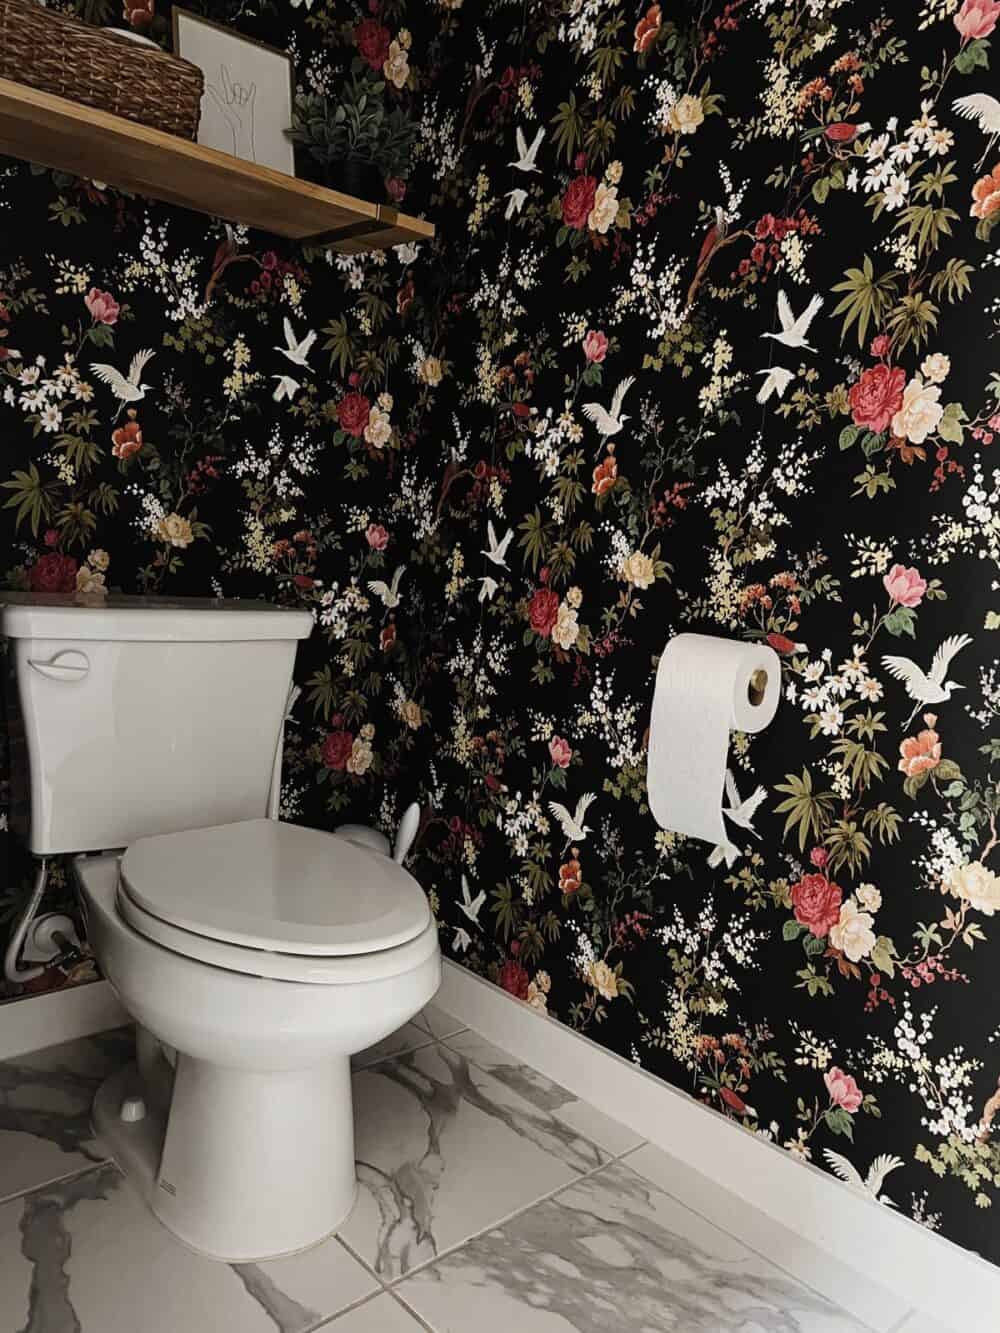 Toilet in a powder room with floral wallpaper